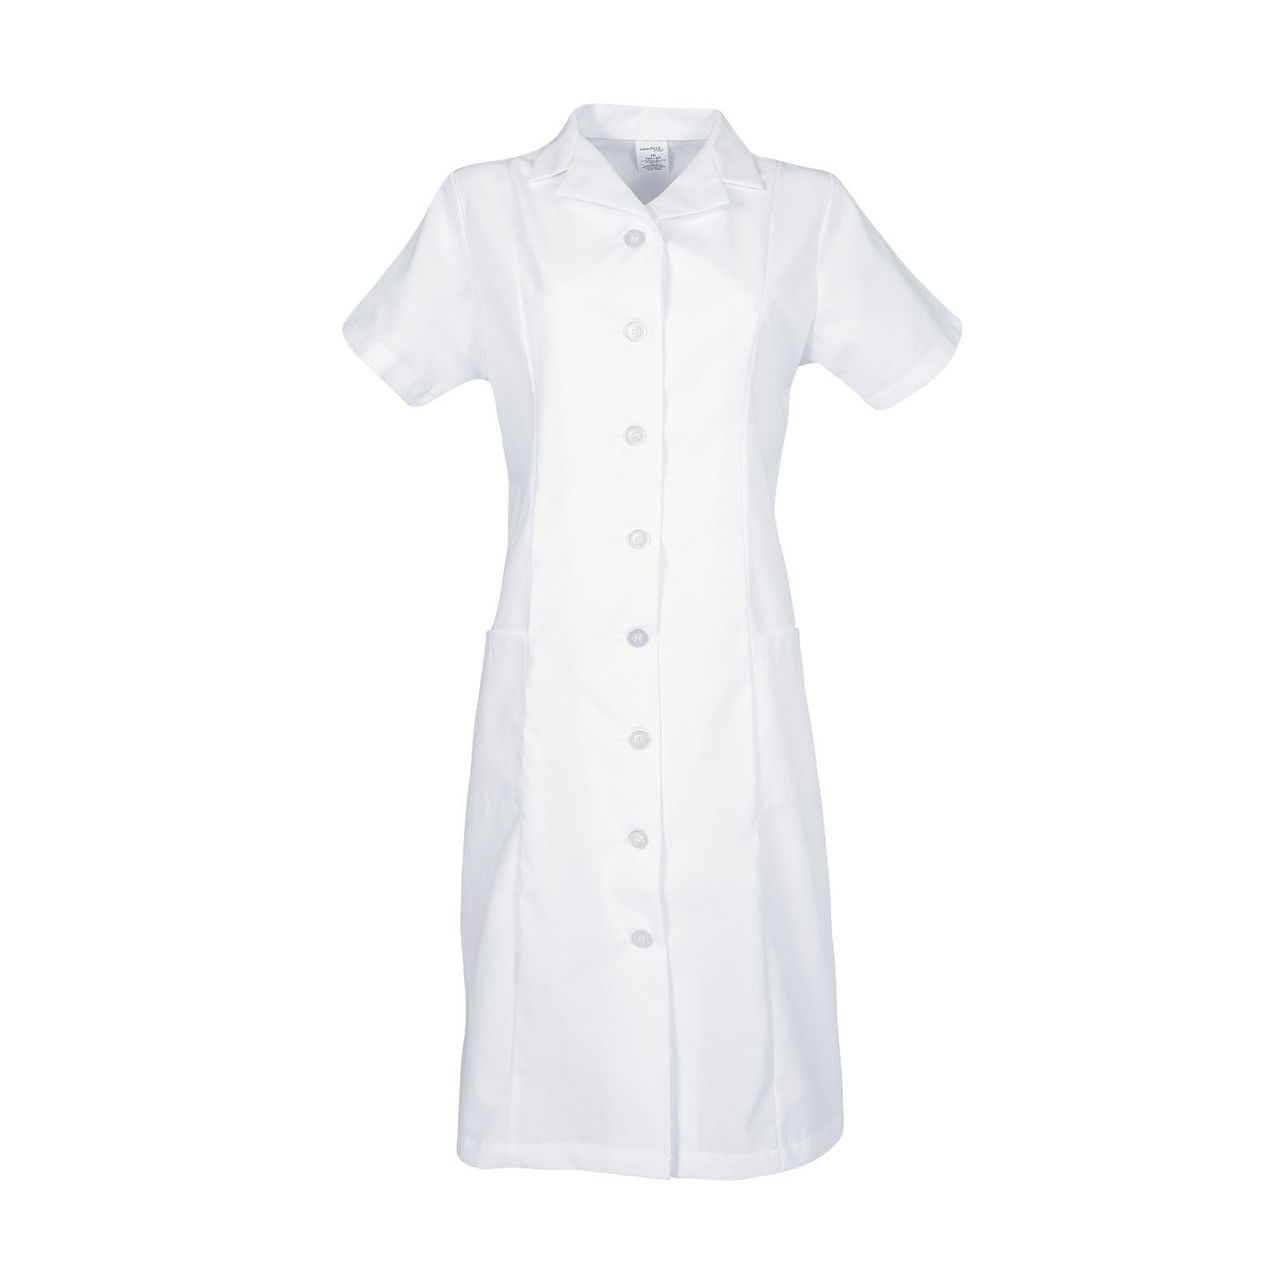 Is the white uniform dress a tight or loose fit?